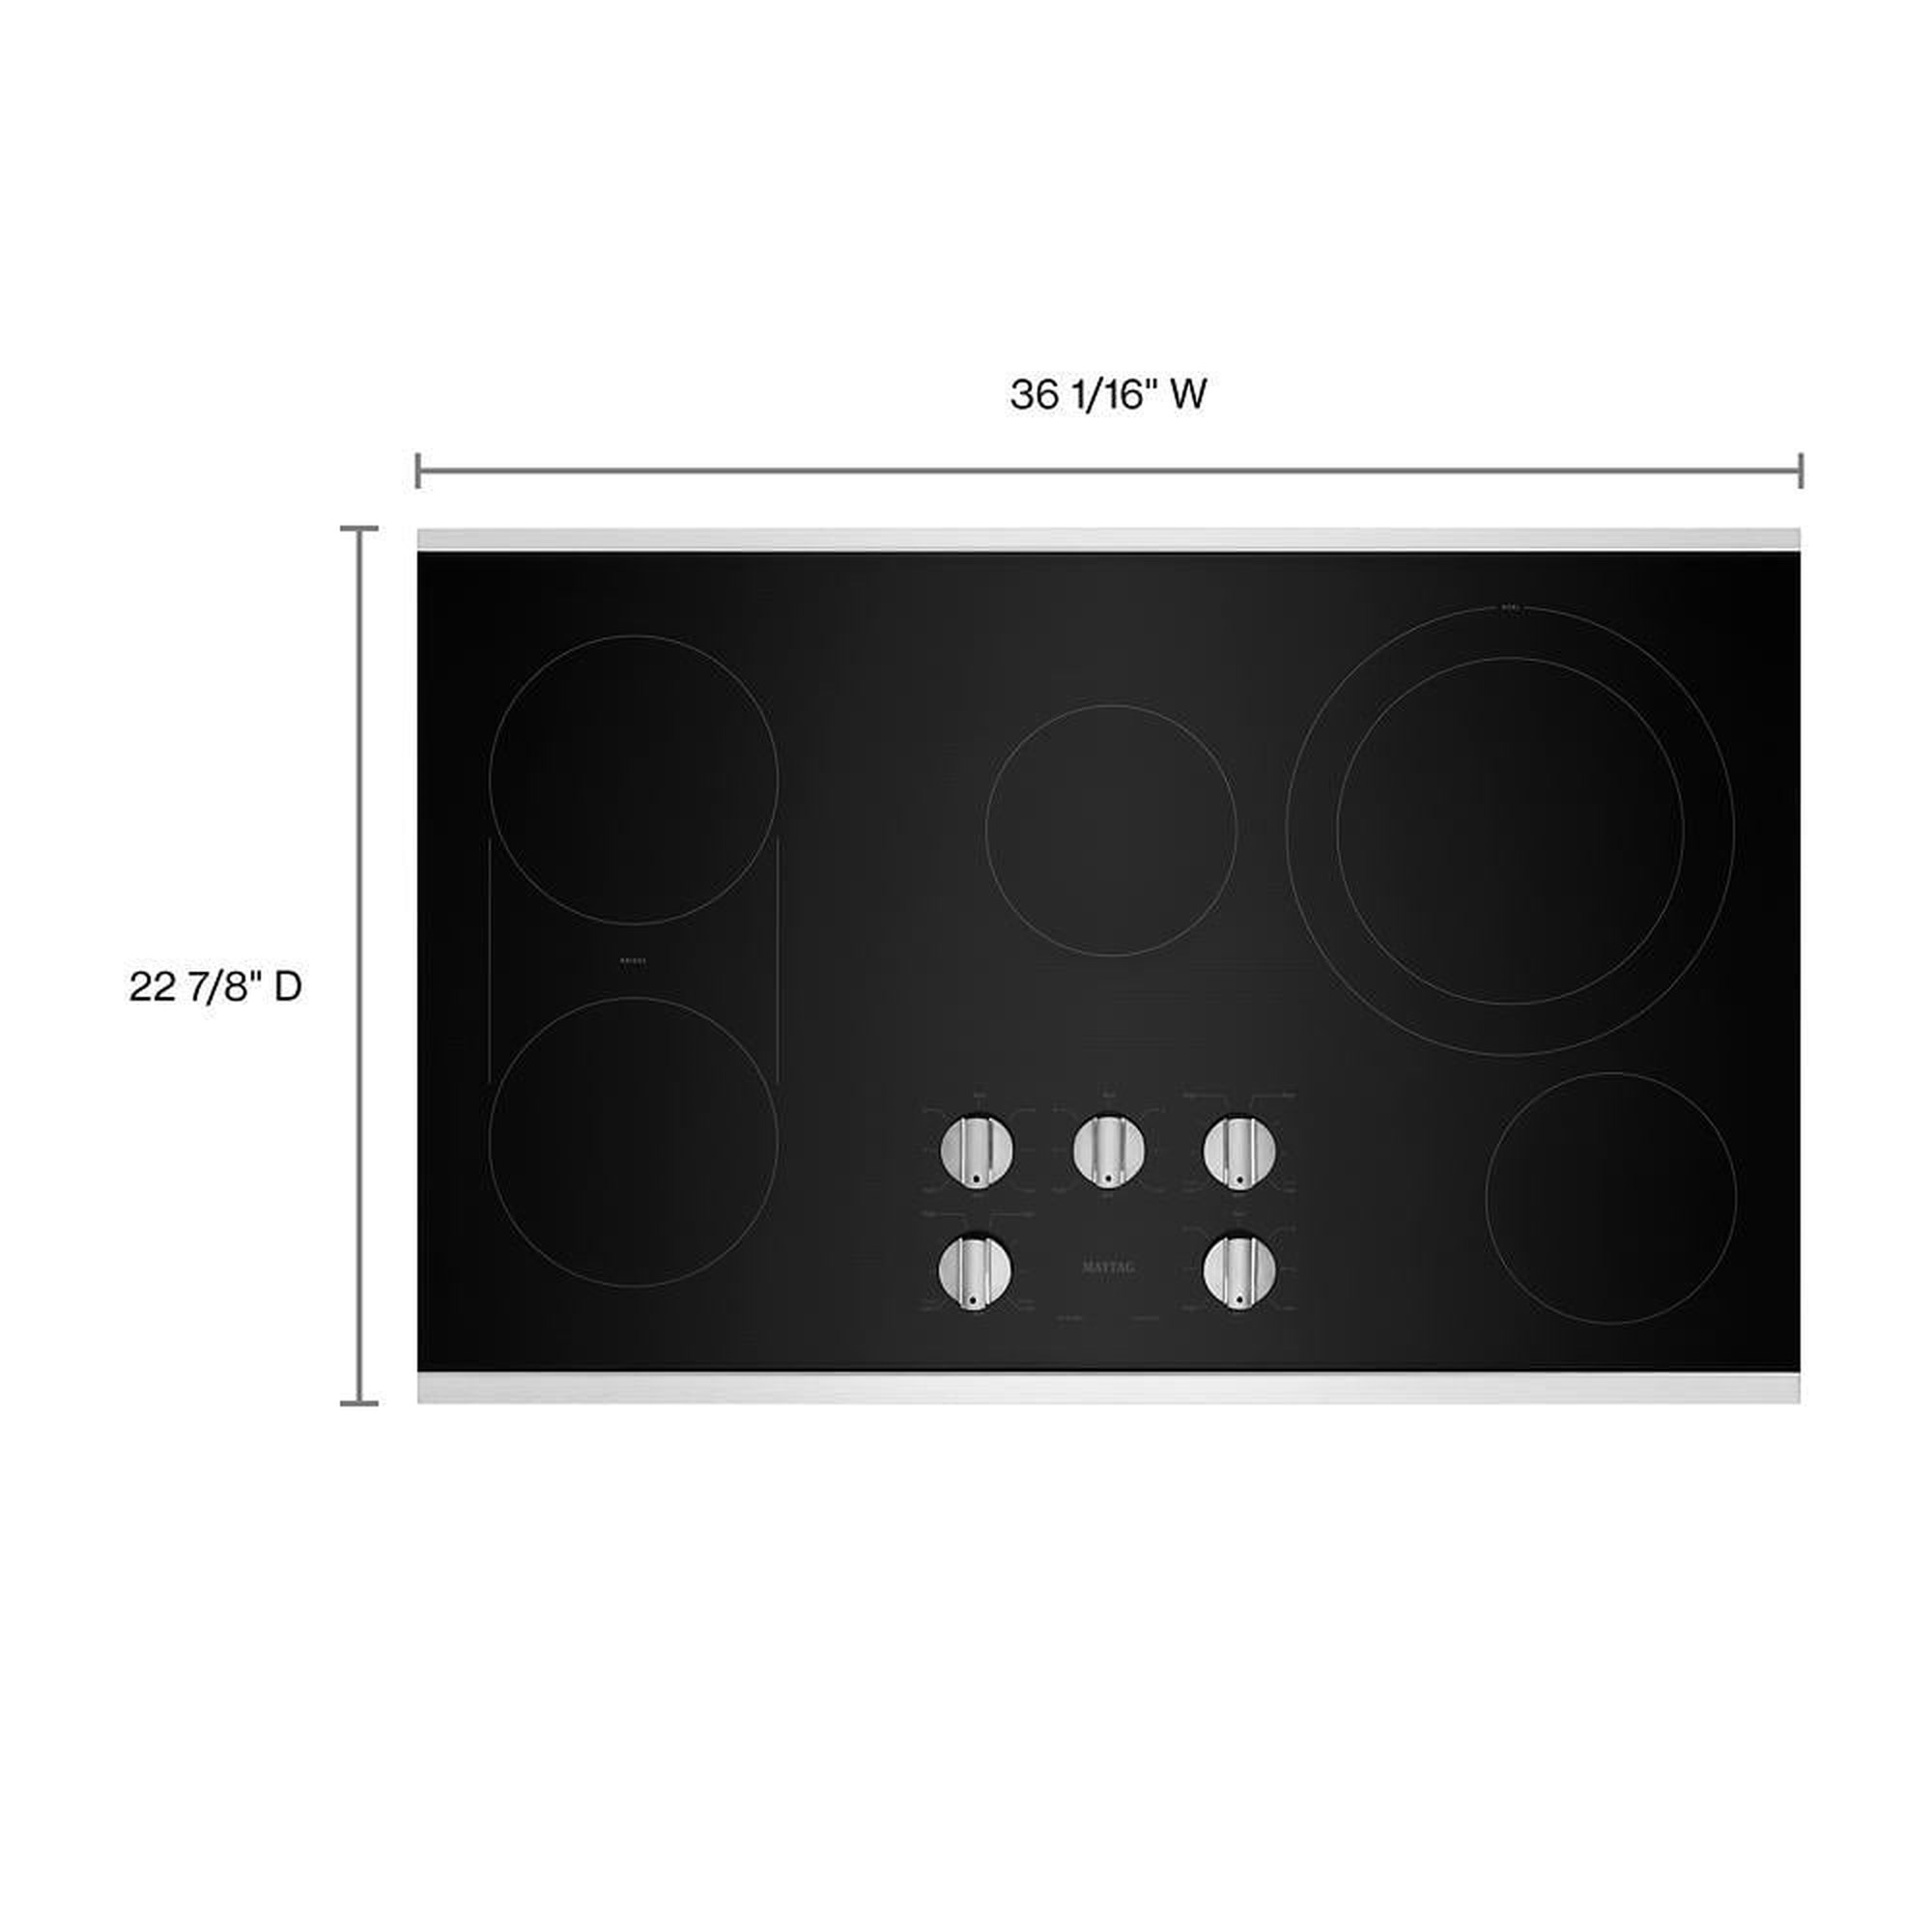 30-Inch Electric Cooktop with Reversible Grill and Griddle Black MEC8830HB